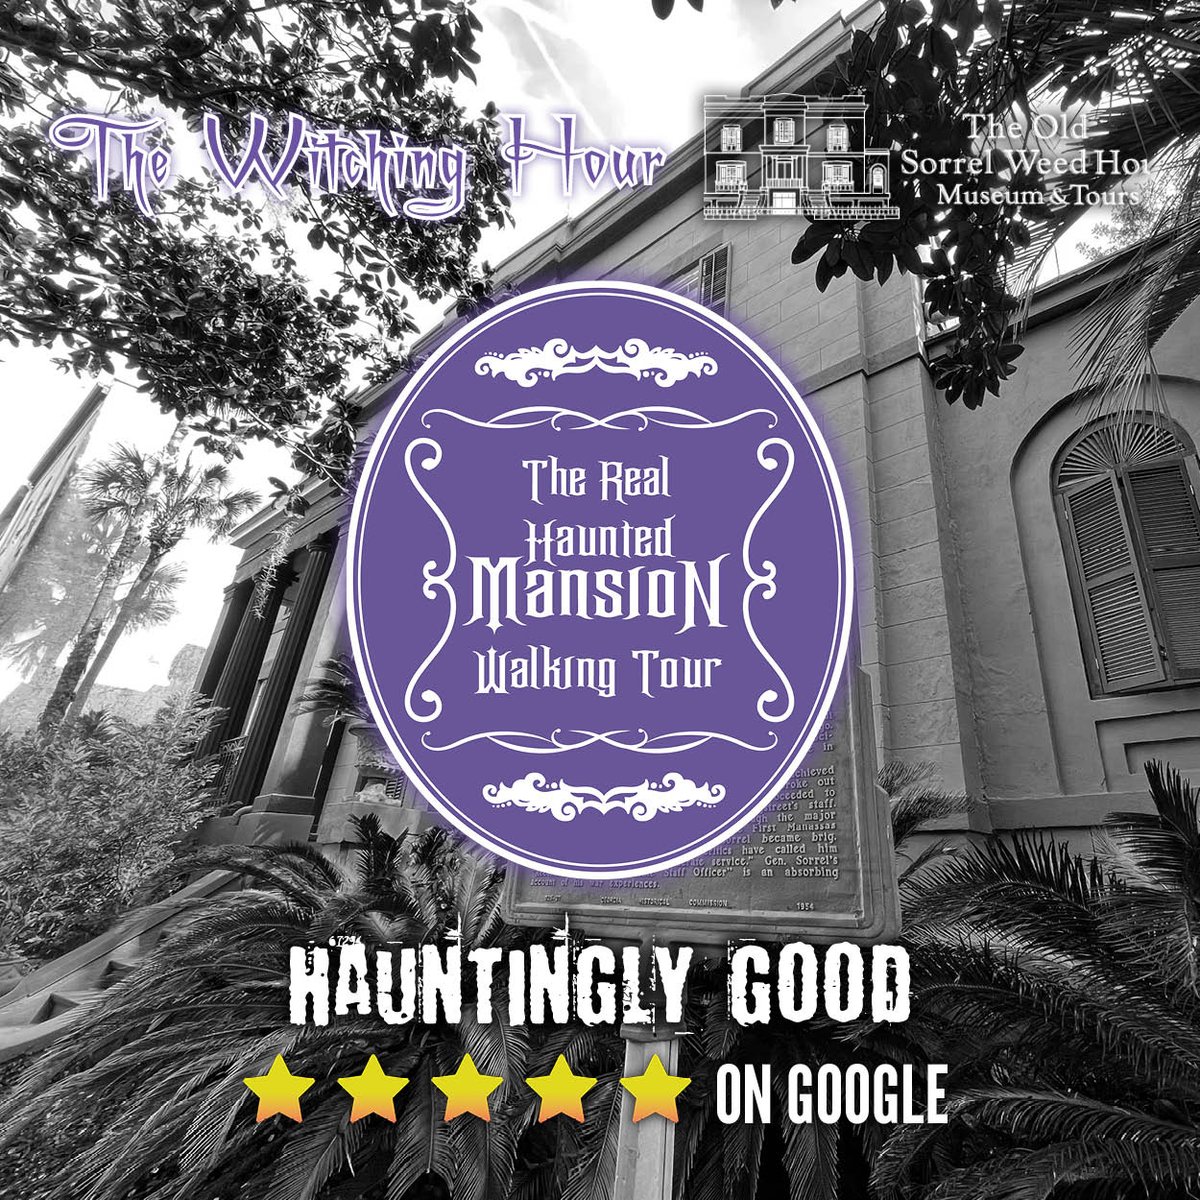 Get #spooky in #Savannah tonight with The #Haunted Mansion Walking Tour and The Savannah Ghost Tour!
Book at witchinghoursavannah.com
#ghosts #historicsavannah #downtownsavannah #visitsavannah #visittybee #paranormal #paranormalinvestigator #ghosthunting #ghosttours #spookyvibes